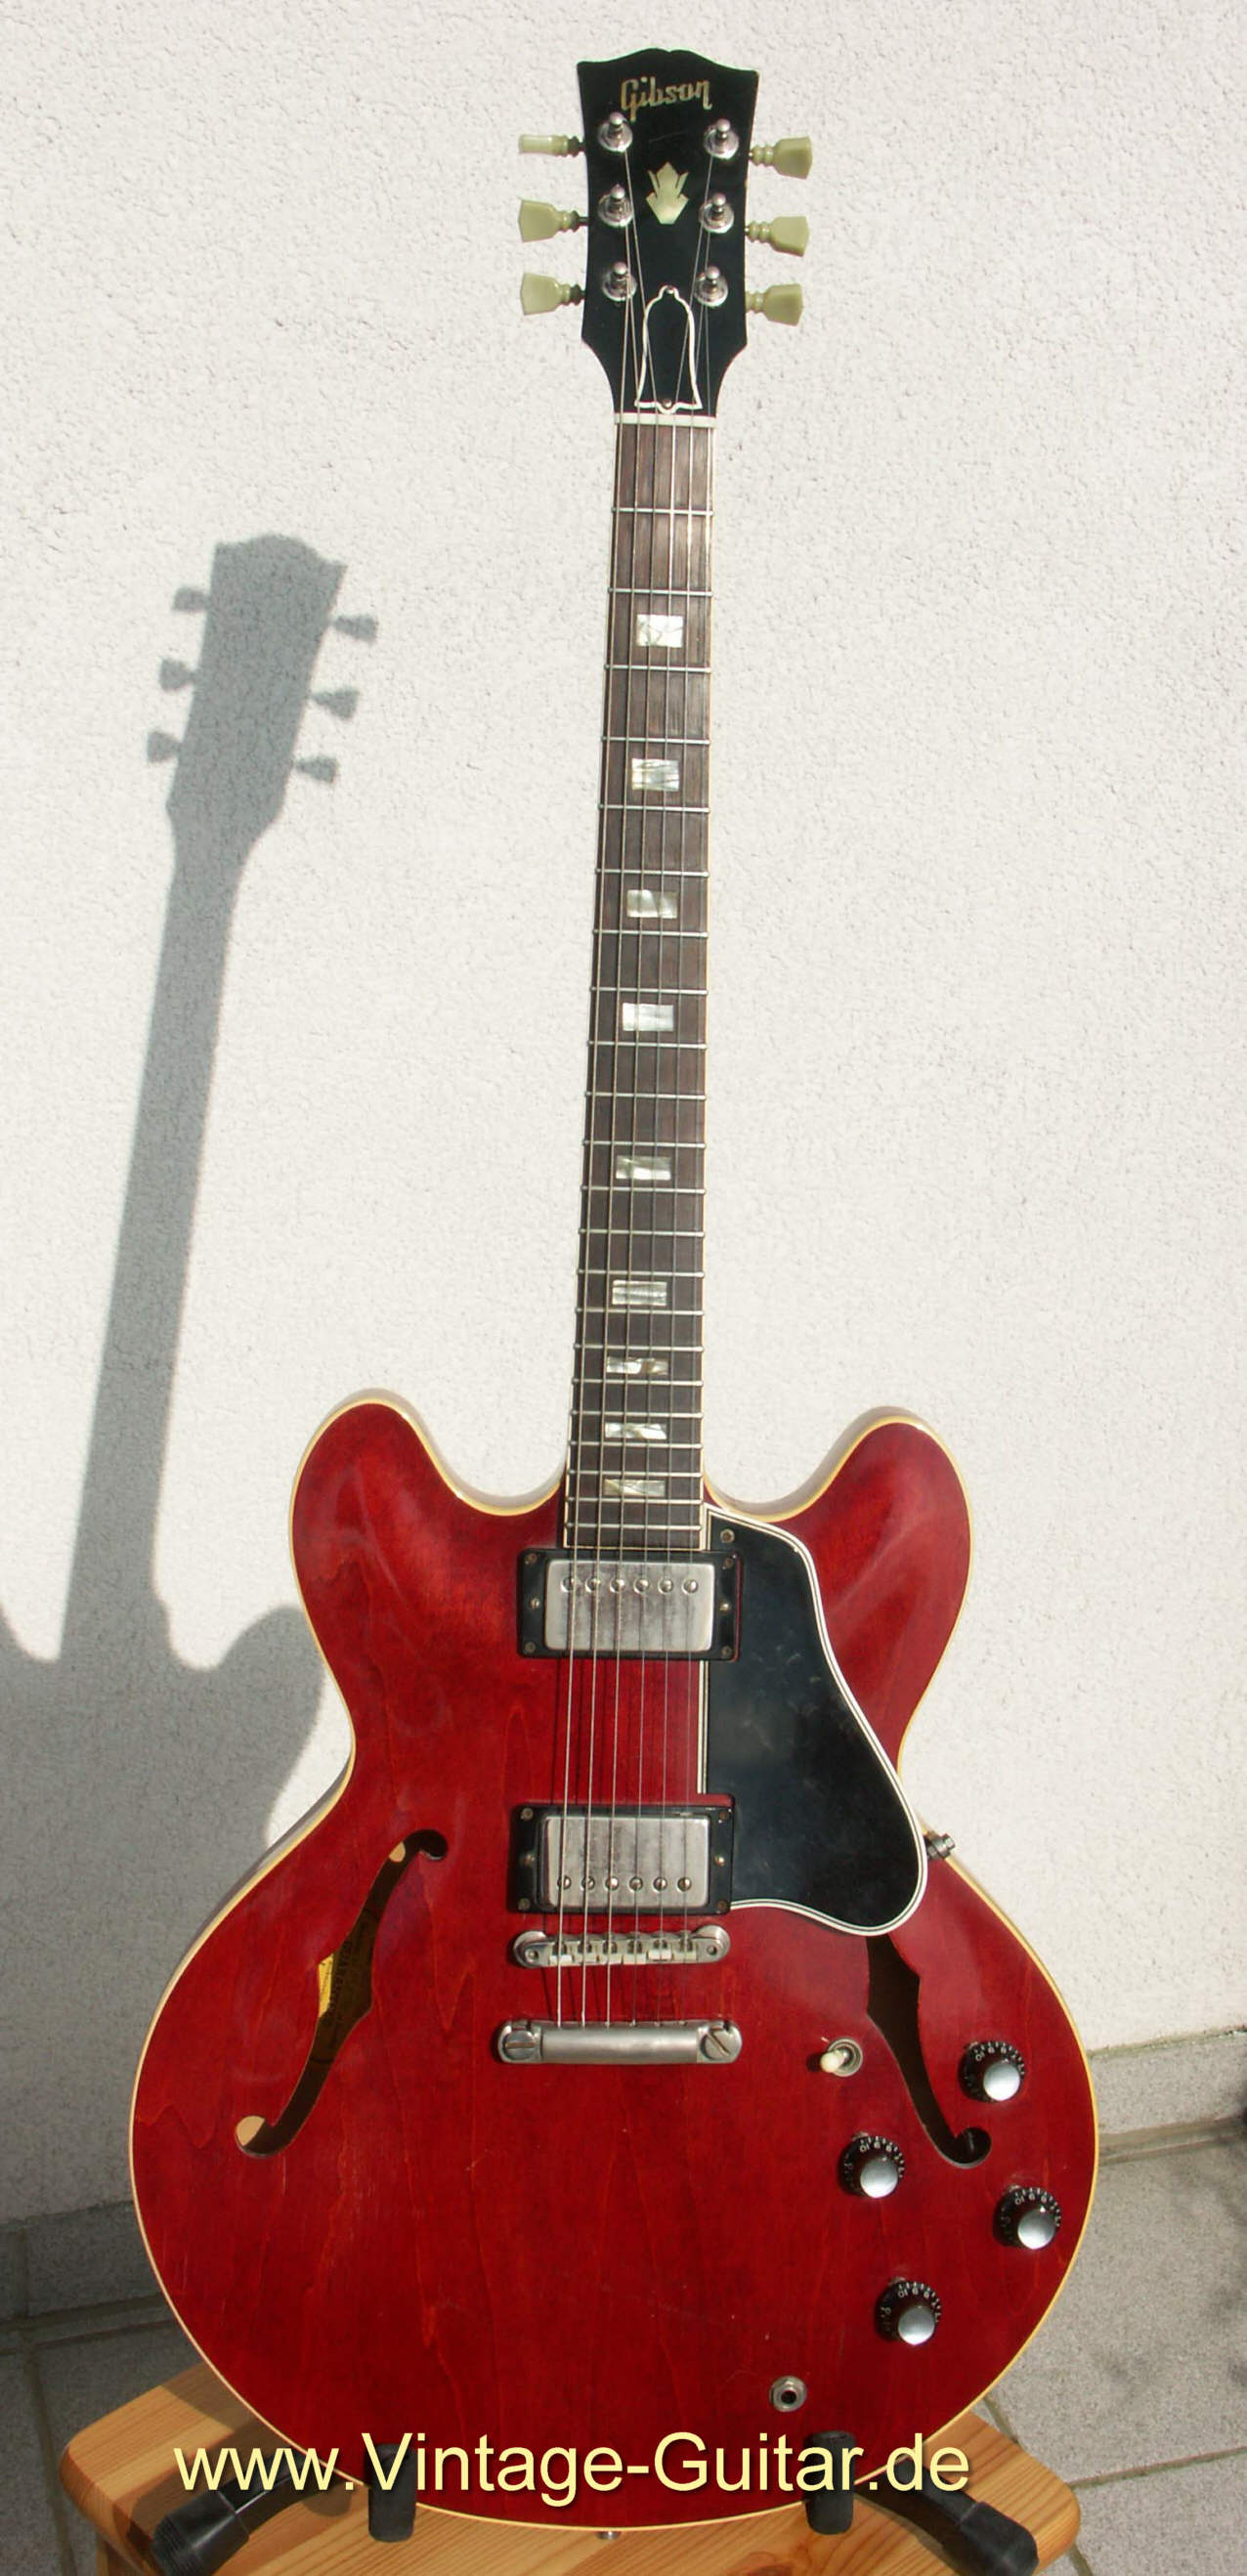 Gibson_ES-335_1964_red_front.jpg